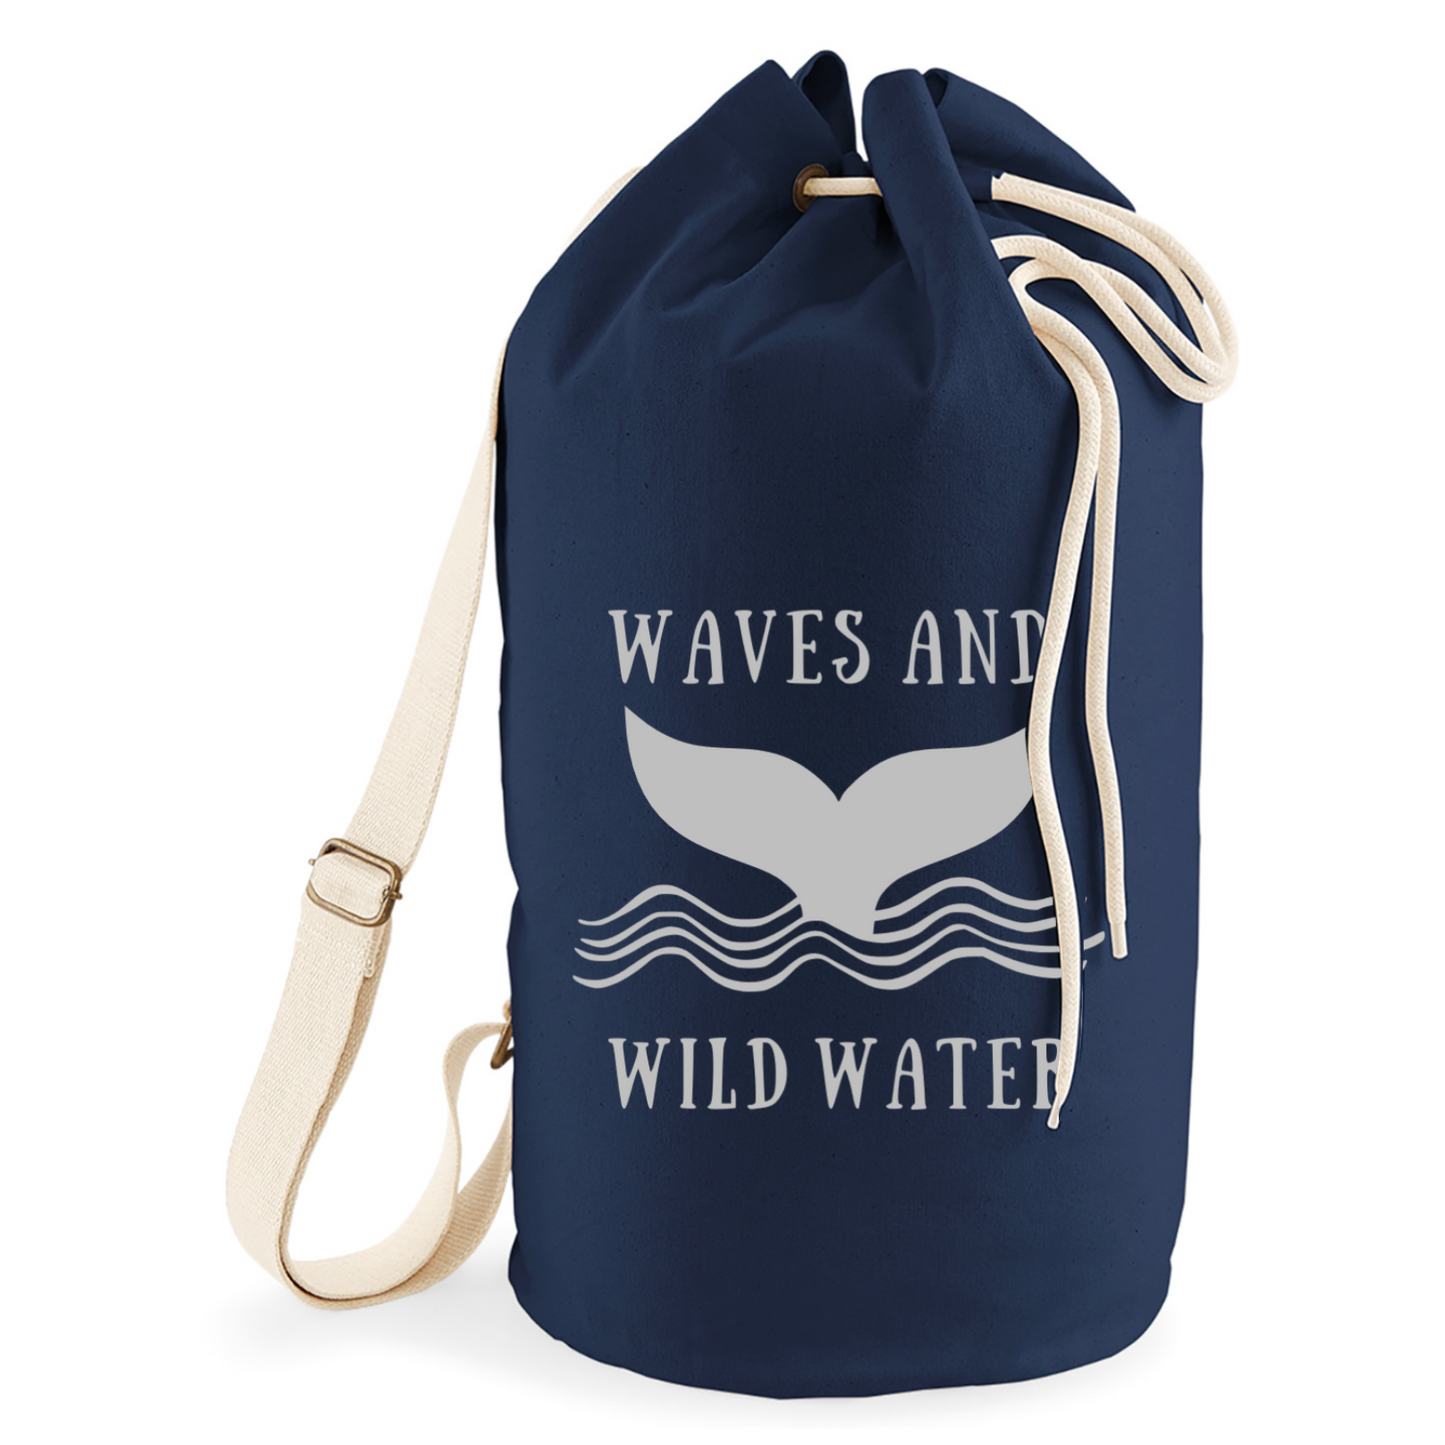 A navy blue sailor bag with a cream rope draw cord and webbing strap. The Waves & Wild Water logo is on the front in silver.